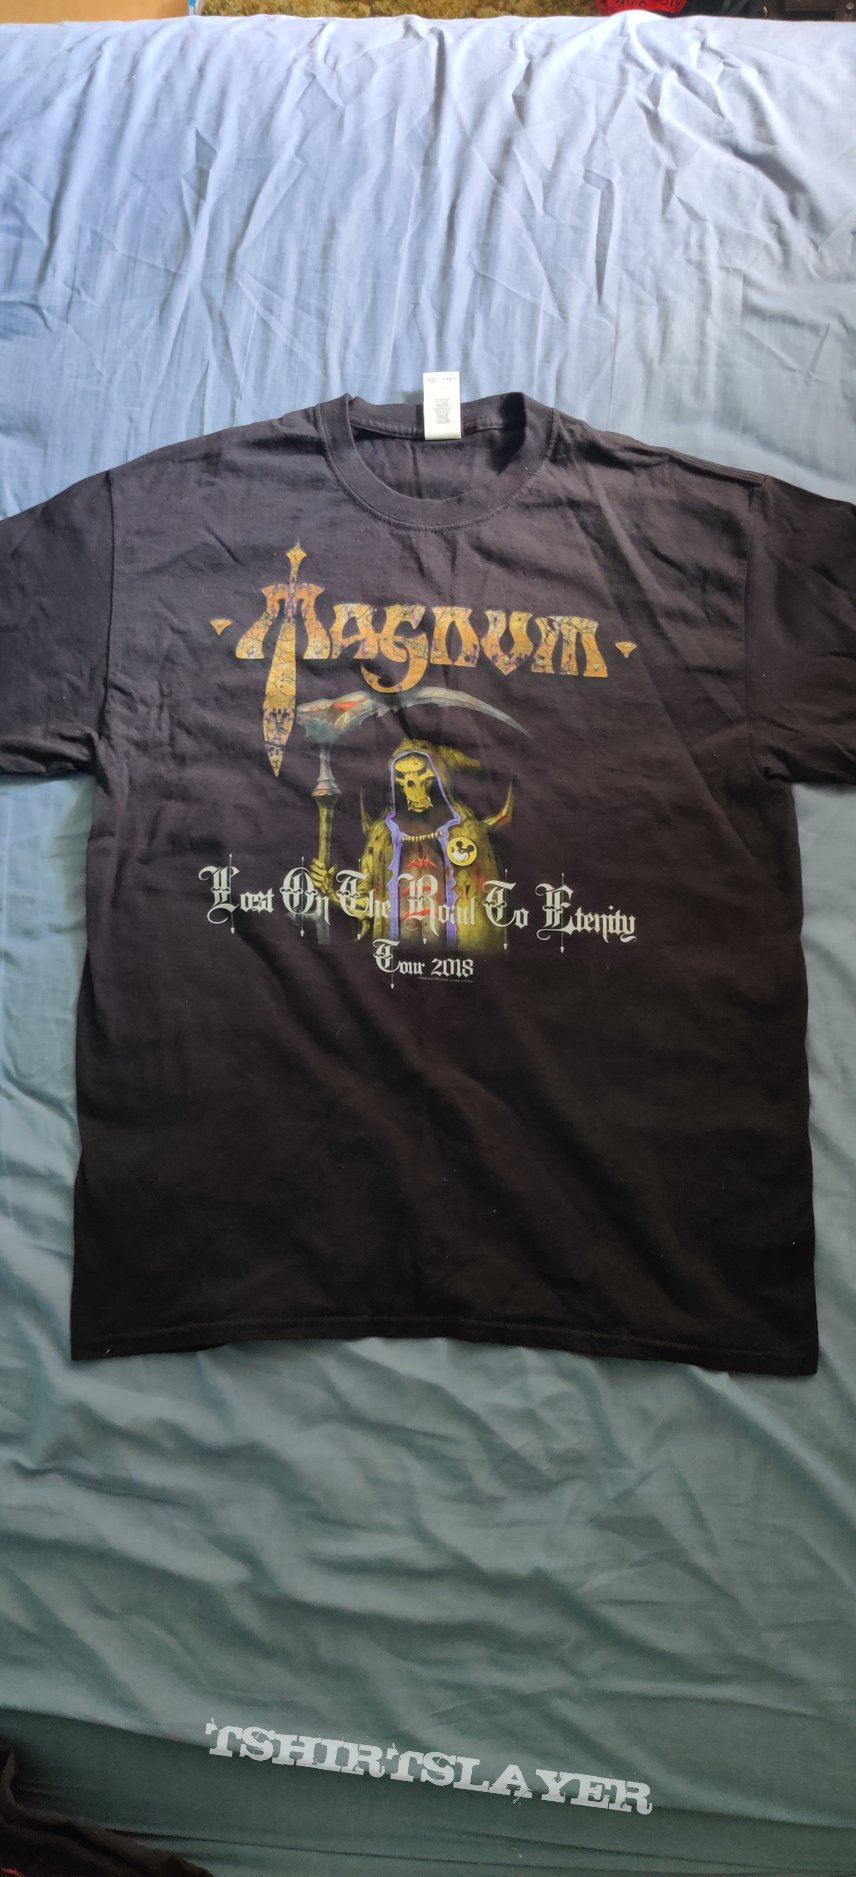 Magnum 2018 official tour t shirt on the road to eternity